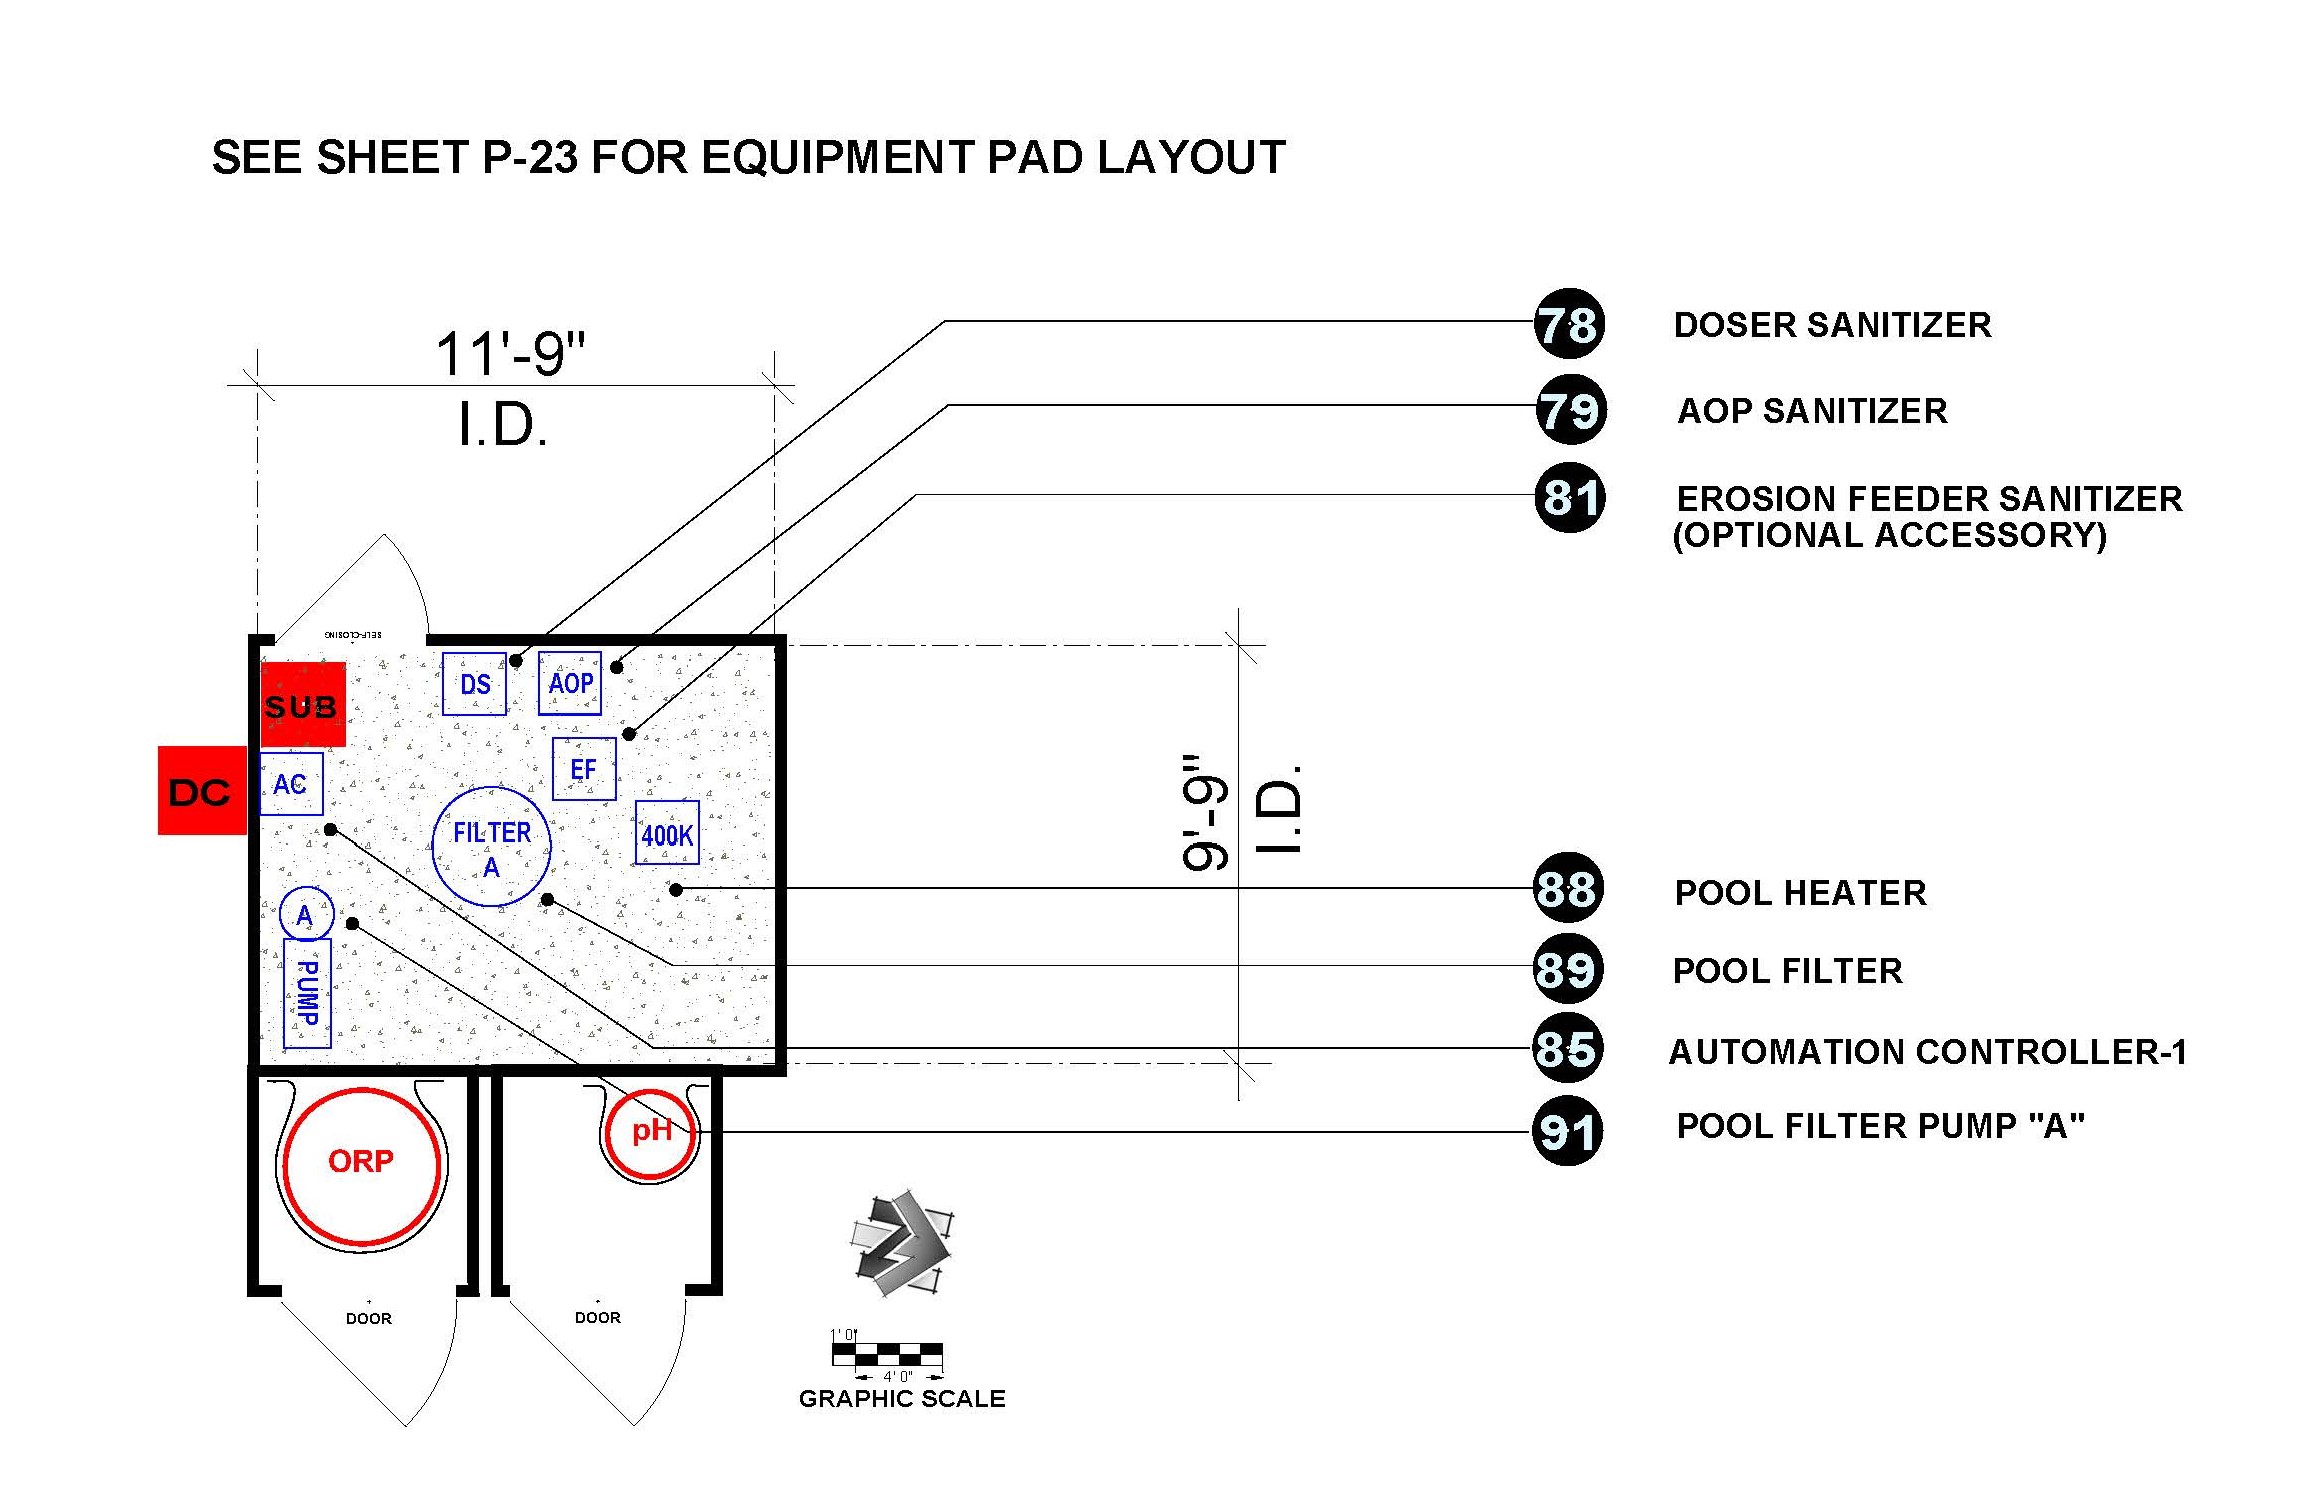 EQUIPMENT ROOM DIMENSIONAL LAYOUT